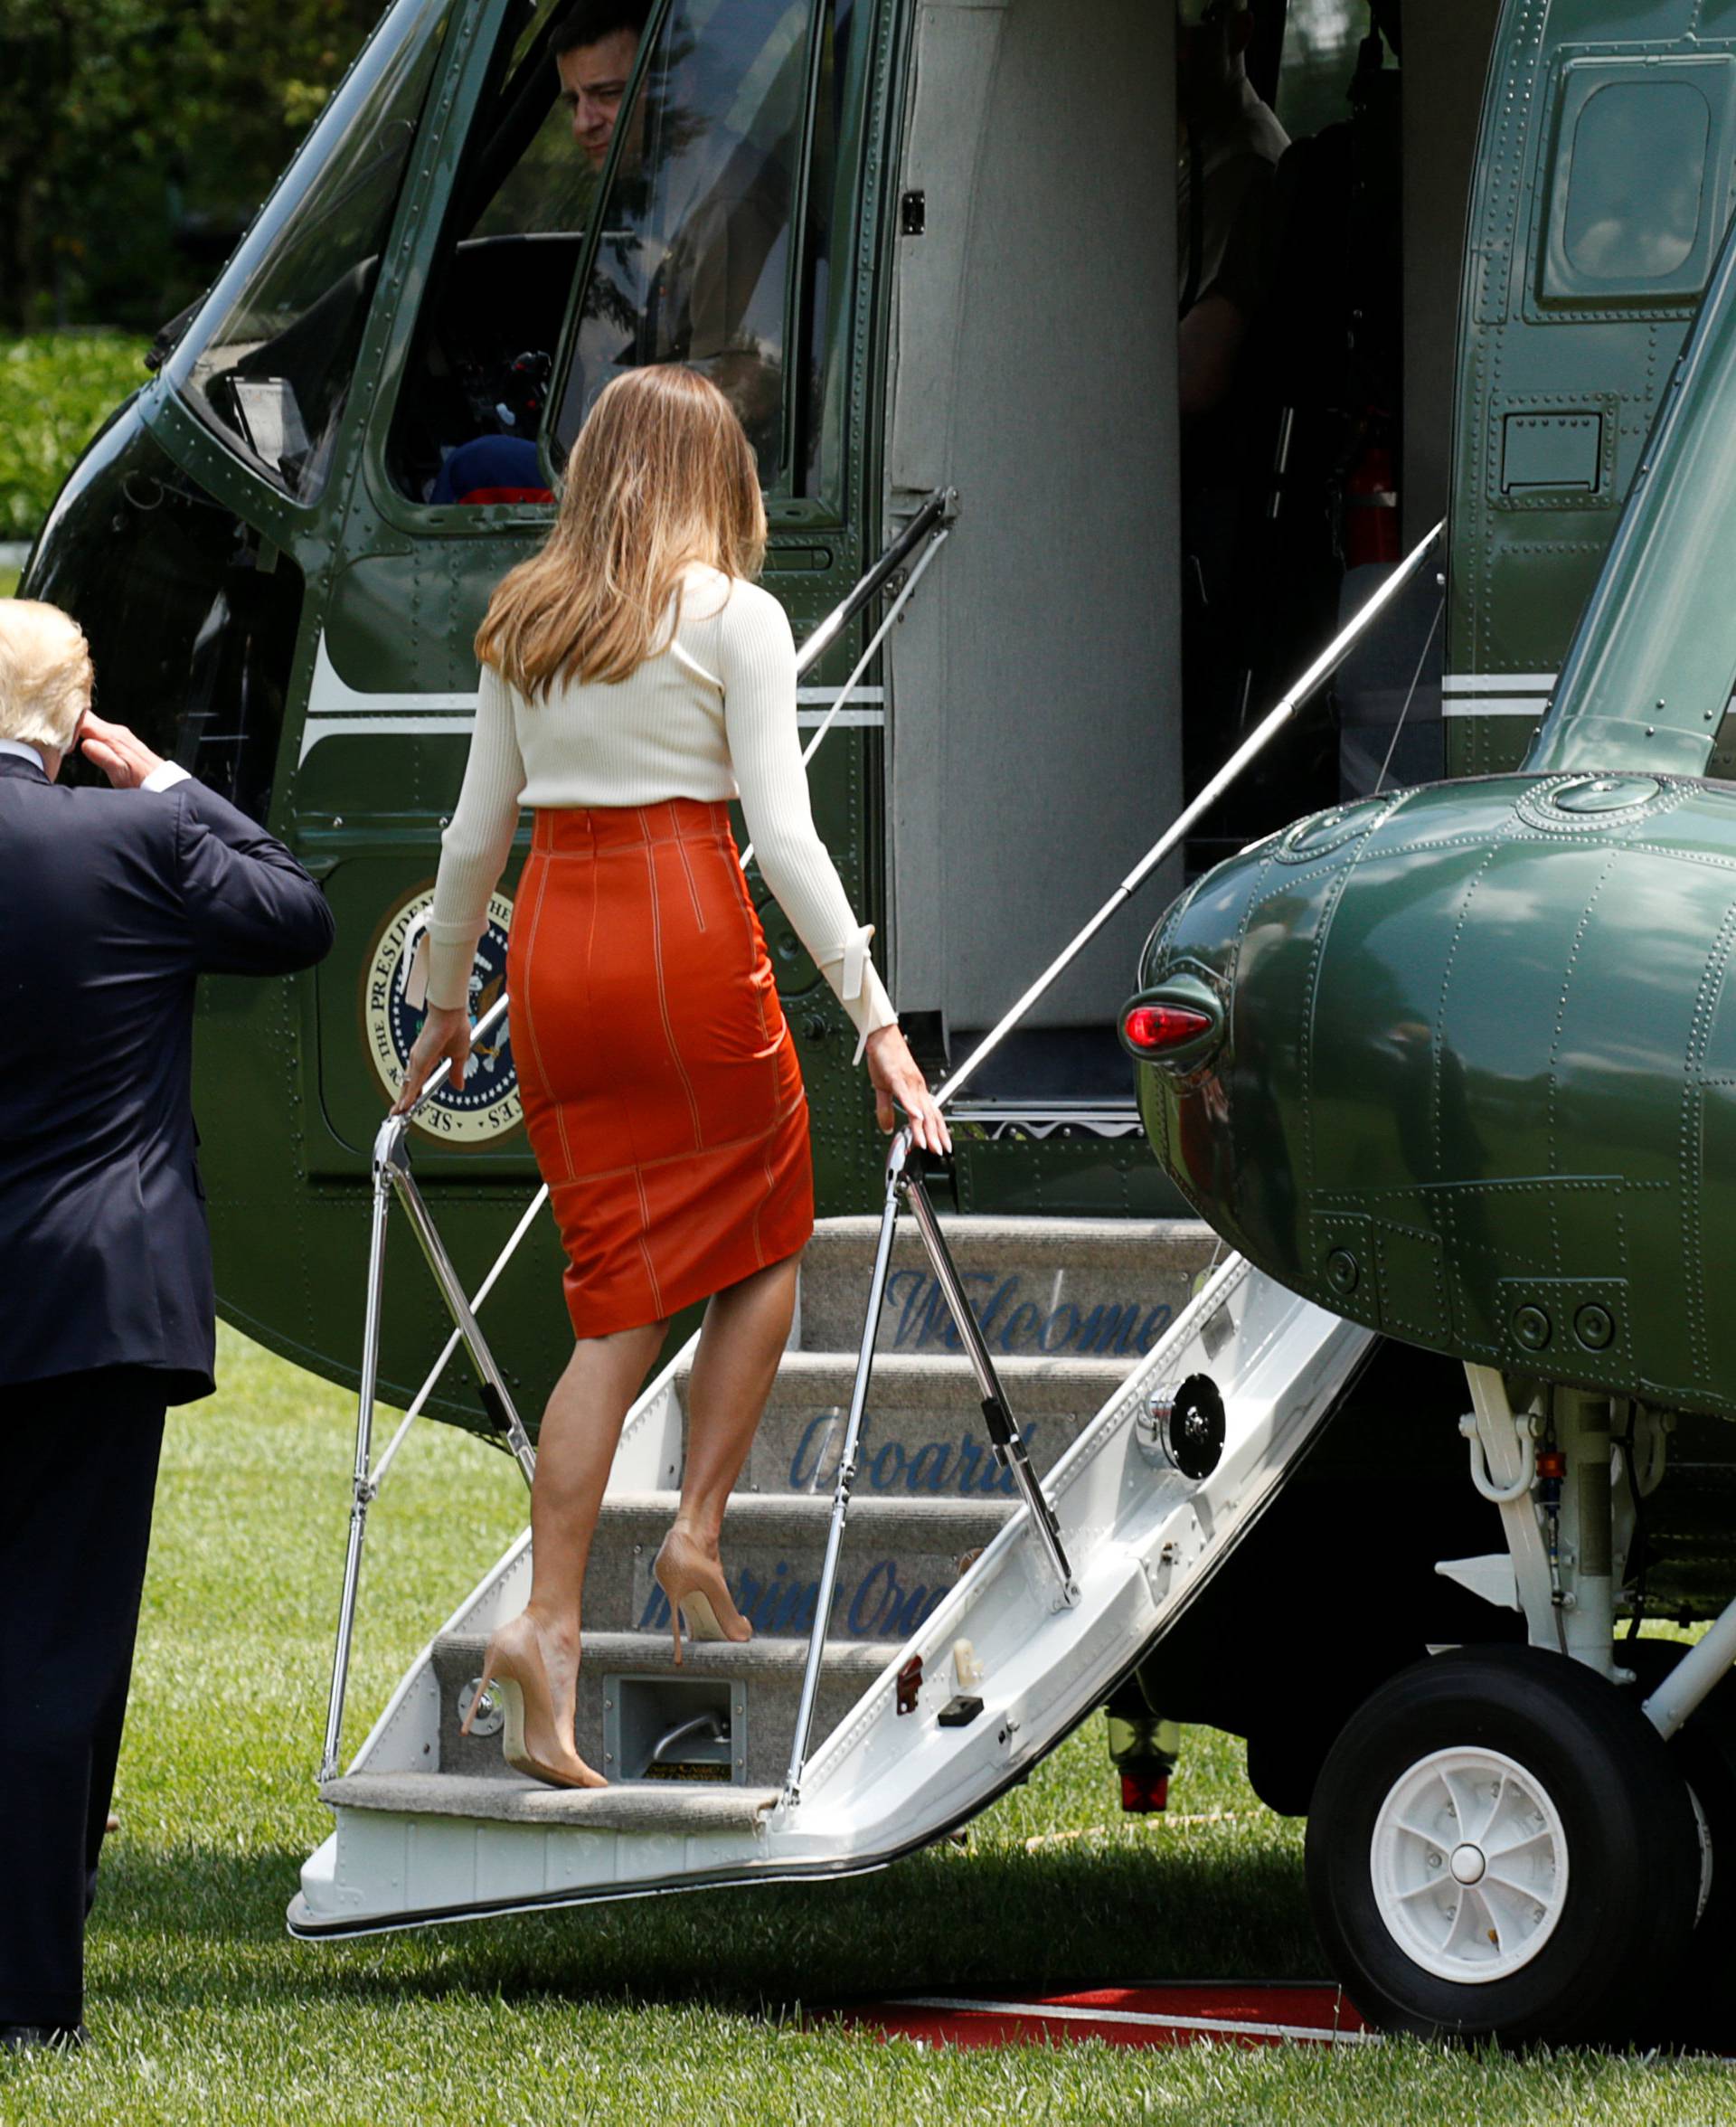 Melania Trump and U.S. President Trump board Marine One to embark on a trip to the Middle East and Europe, at the White House in Washington